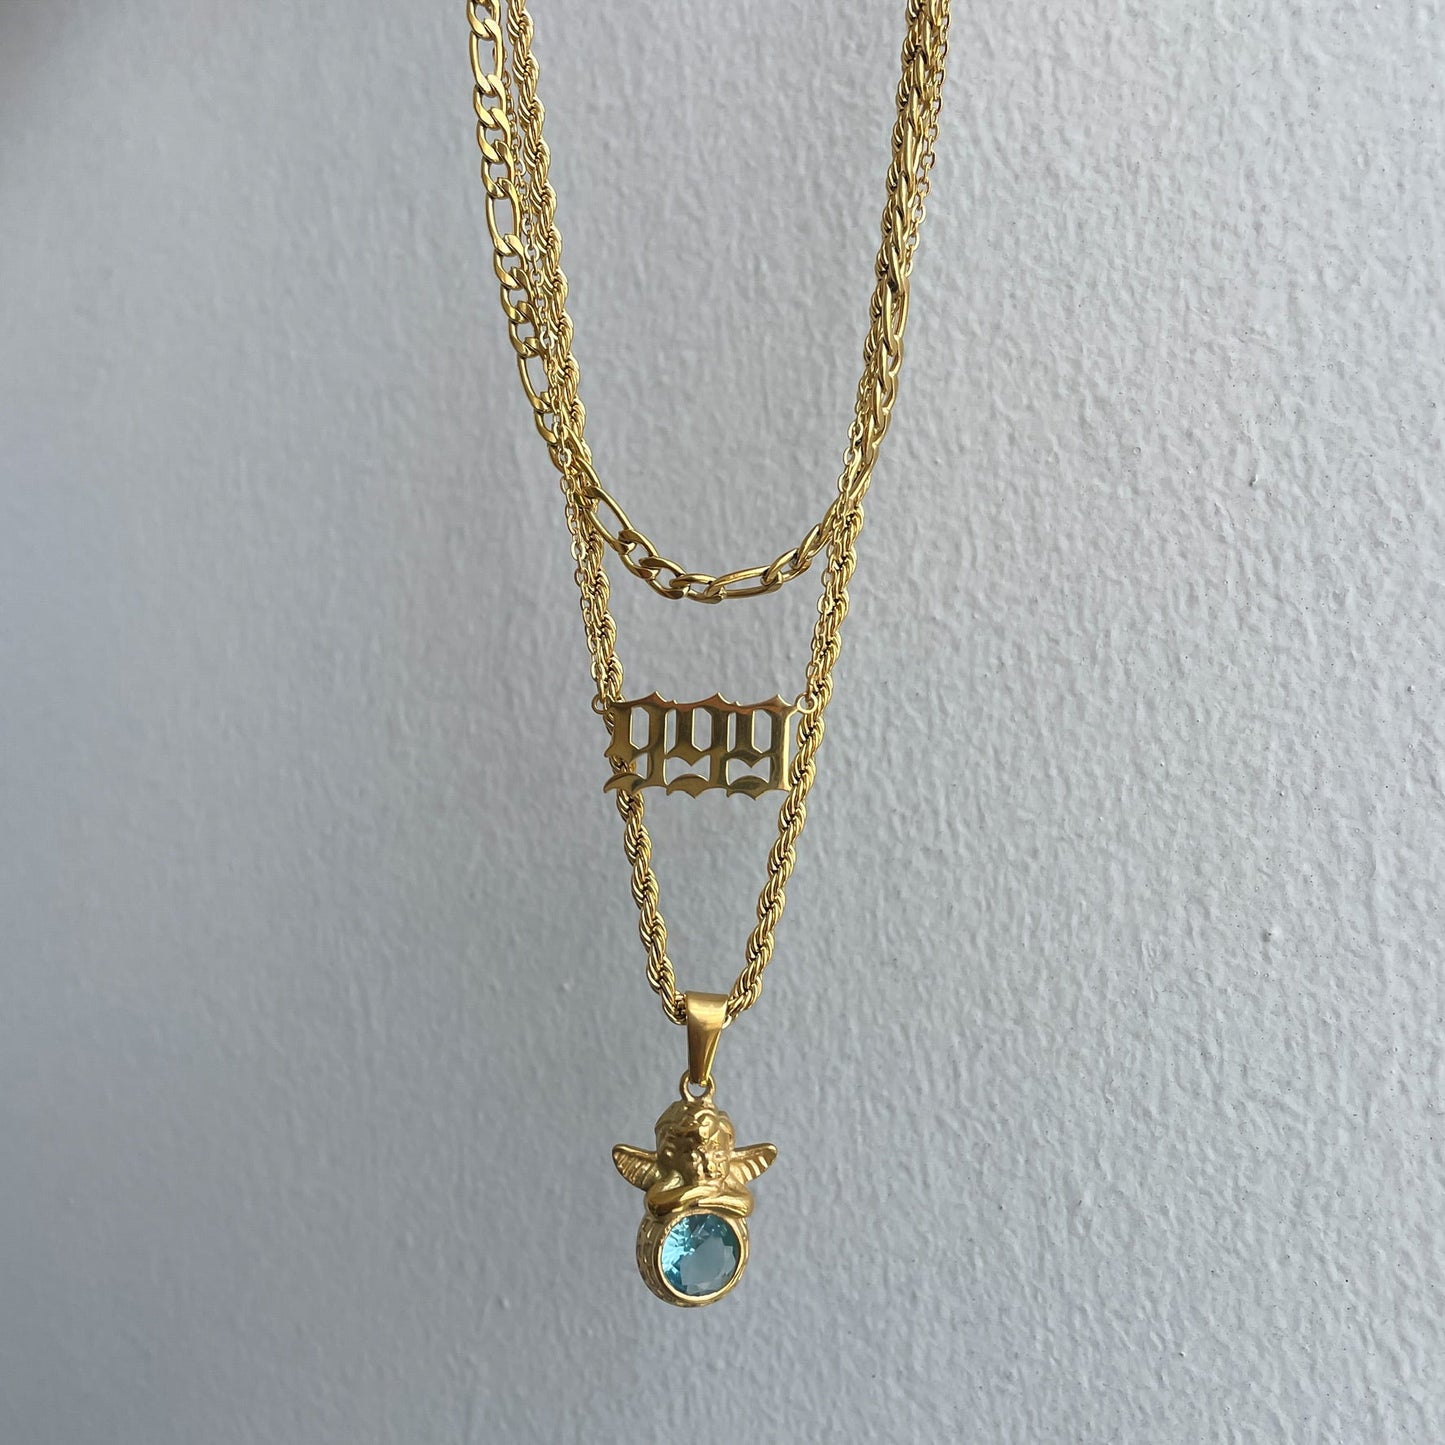 Angel meaning necklace(癒し、自由) - 𝐇𝐨𝐧𝐞𝐲 𝐁𝐮𝐭𝐭𝐞𝐫 𝐍𝐢𝐧𝐞